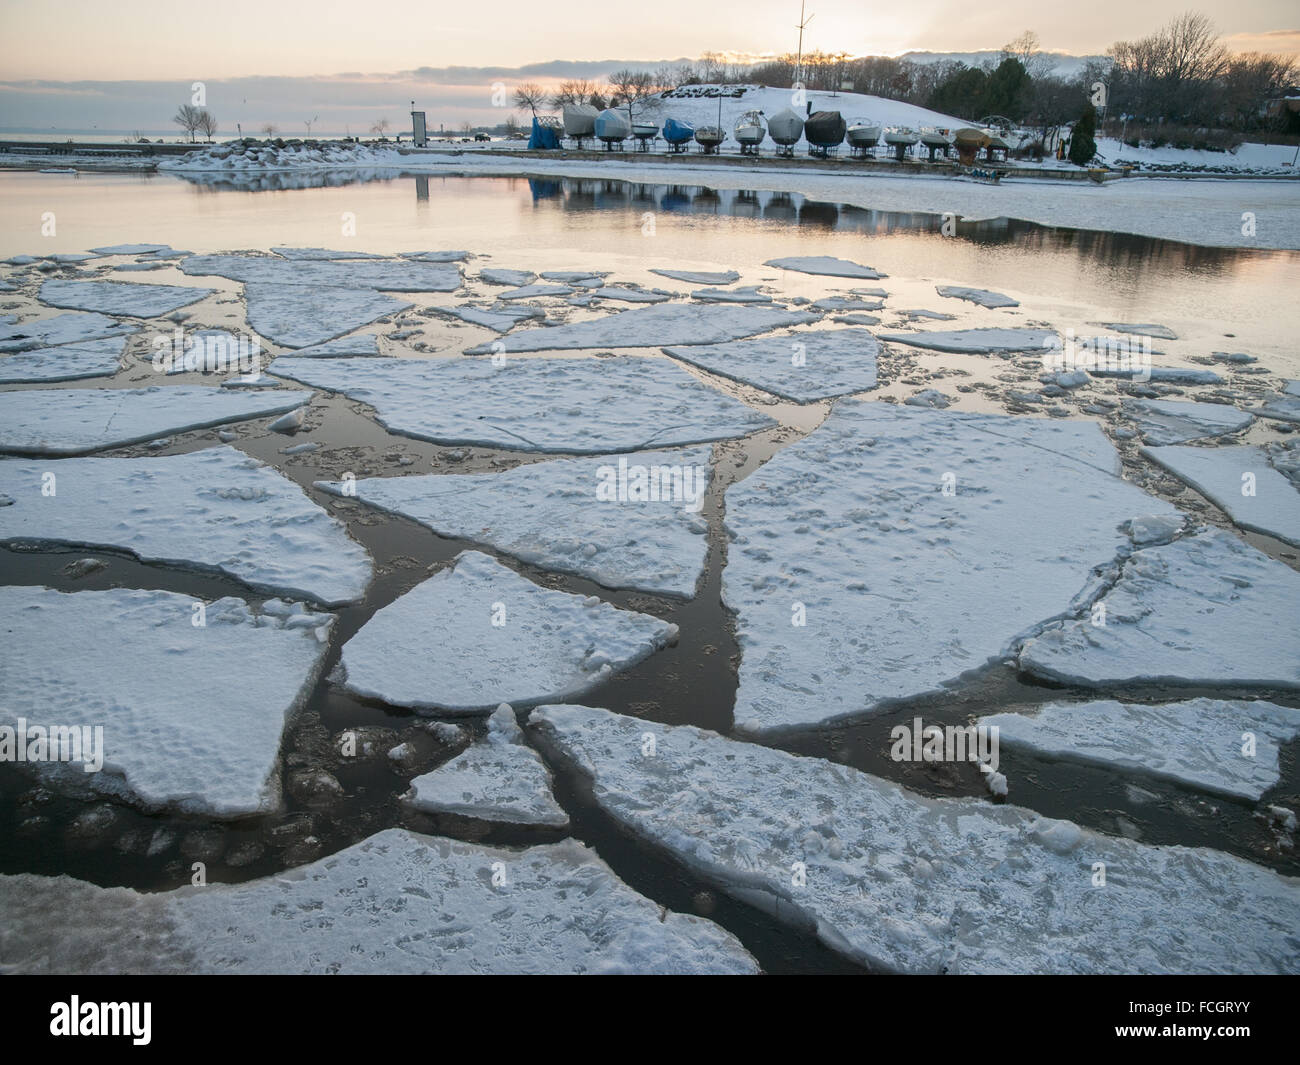 Covered boats on Lake Ontario with floating ice chunks and snow, in Oakville, Ontario, Canada in winter. Stock Photo